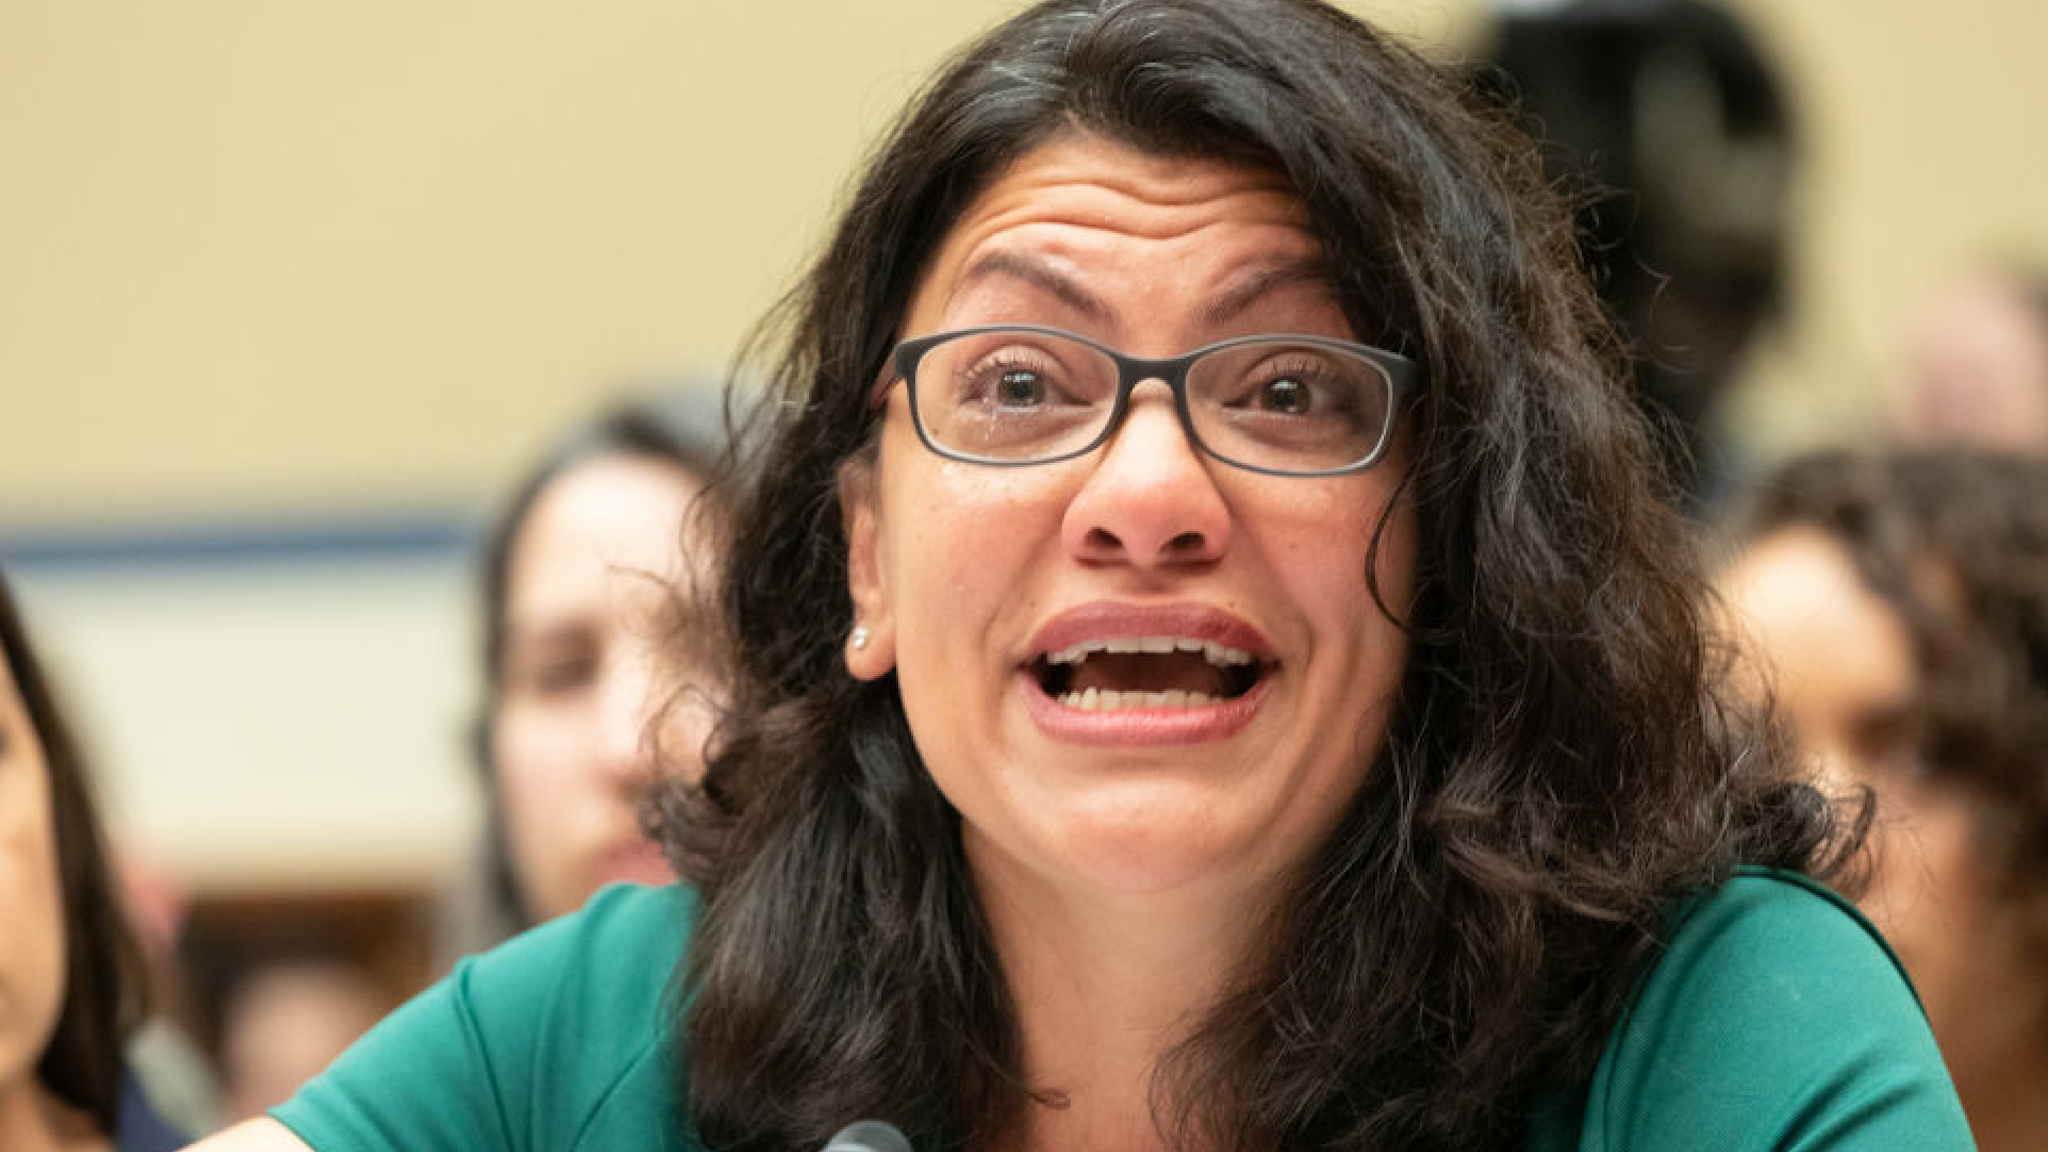 Rep. Rashida Tlaib (D-Mich.) speaks during a House Oversight and Reform Committee hearing on &quot;The Trump Administration's Child Separation Policy: Substantiated Allegations of Mistreatment.&quot; July 12, 2019 in Washington, DC.